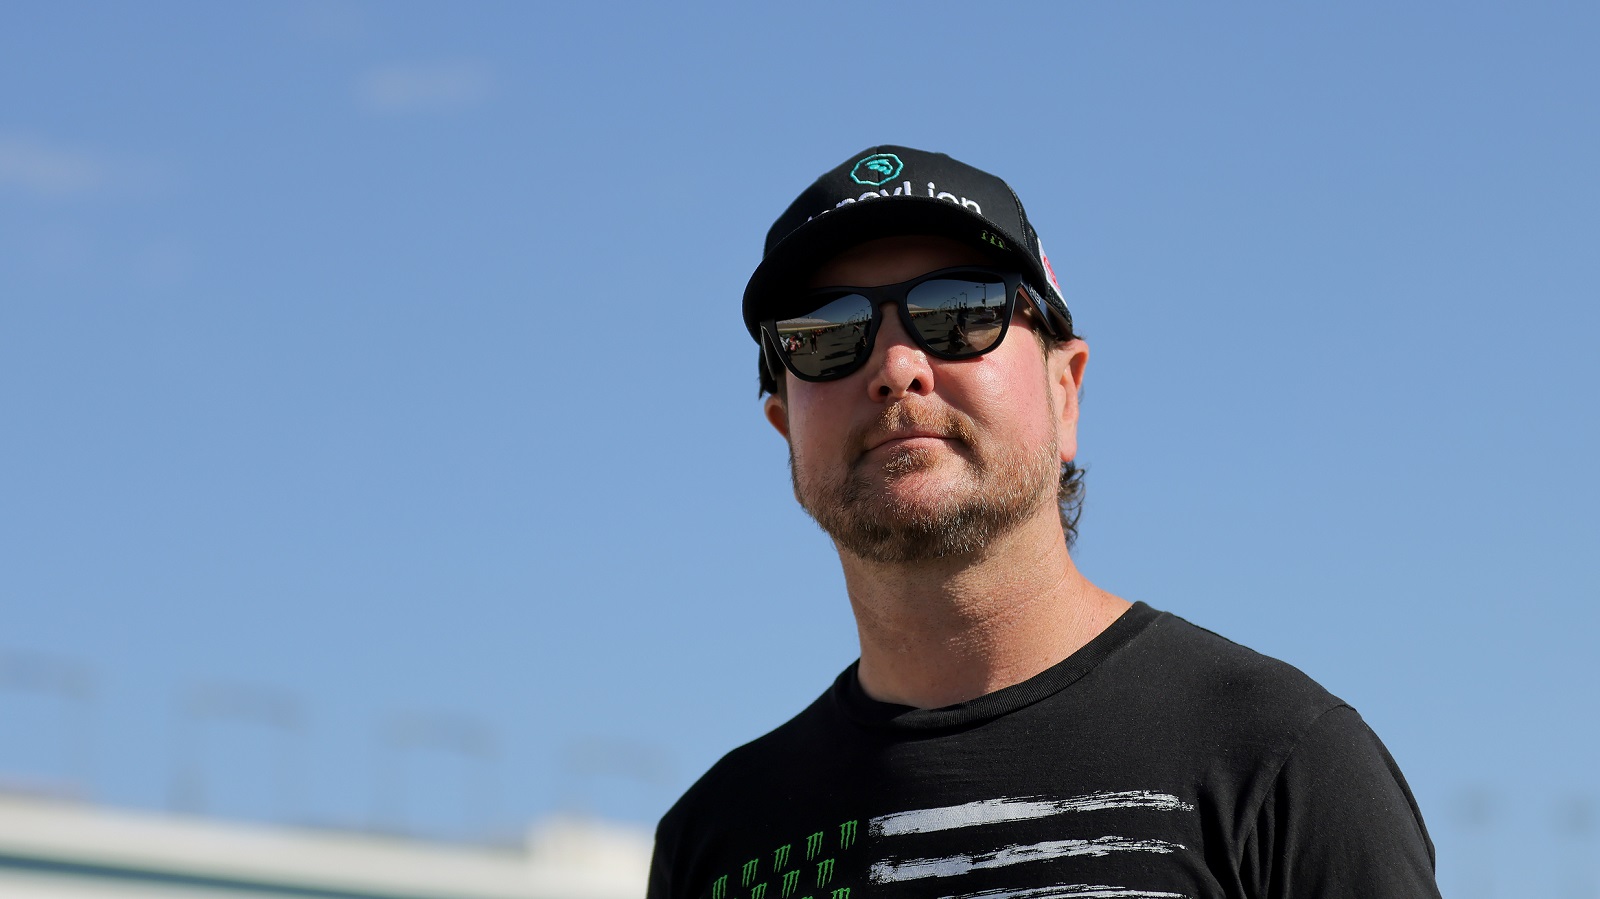 NASCAR driver Kurt Busch looks on during qualifying for the NASCAR Cup Series South Point 400  at Las Vegas Motor Speedway on Oct. 15, 2022. | Jonathan Bachman/Getty Images